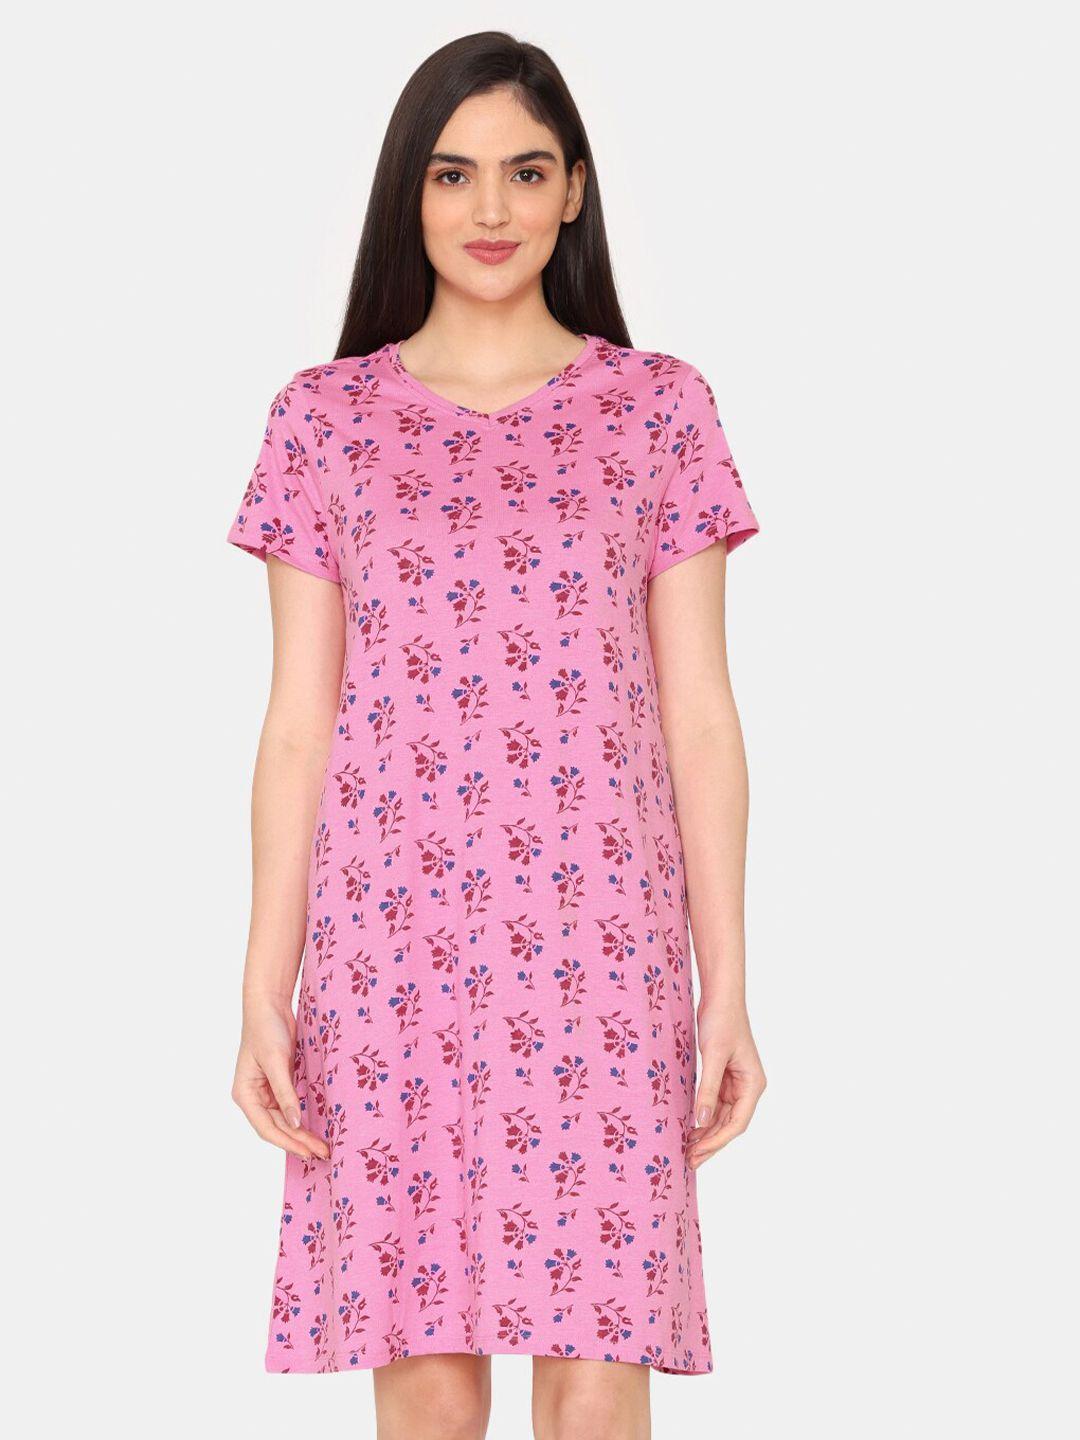 rosaline by zivame floral printed t-shirt nightdress